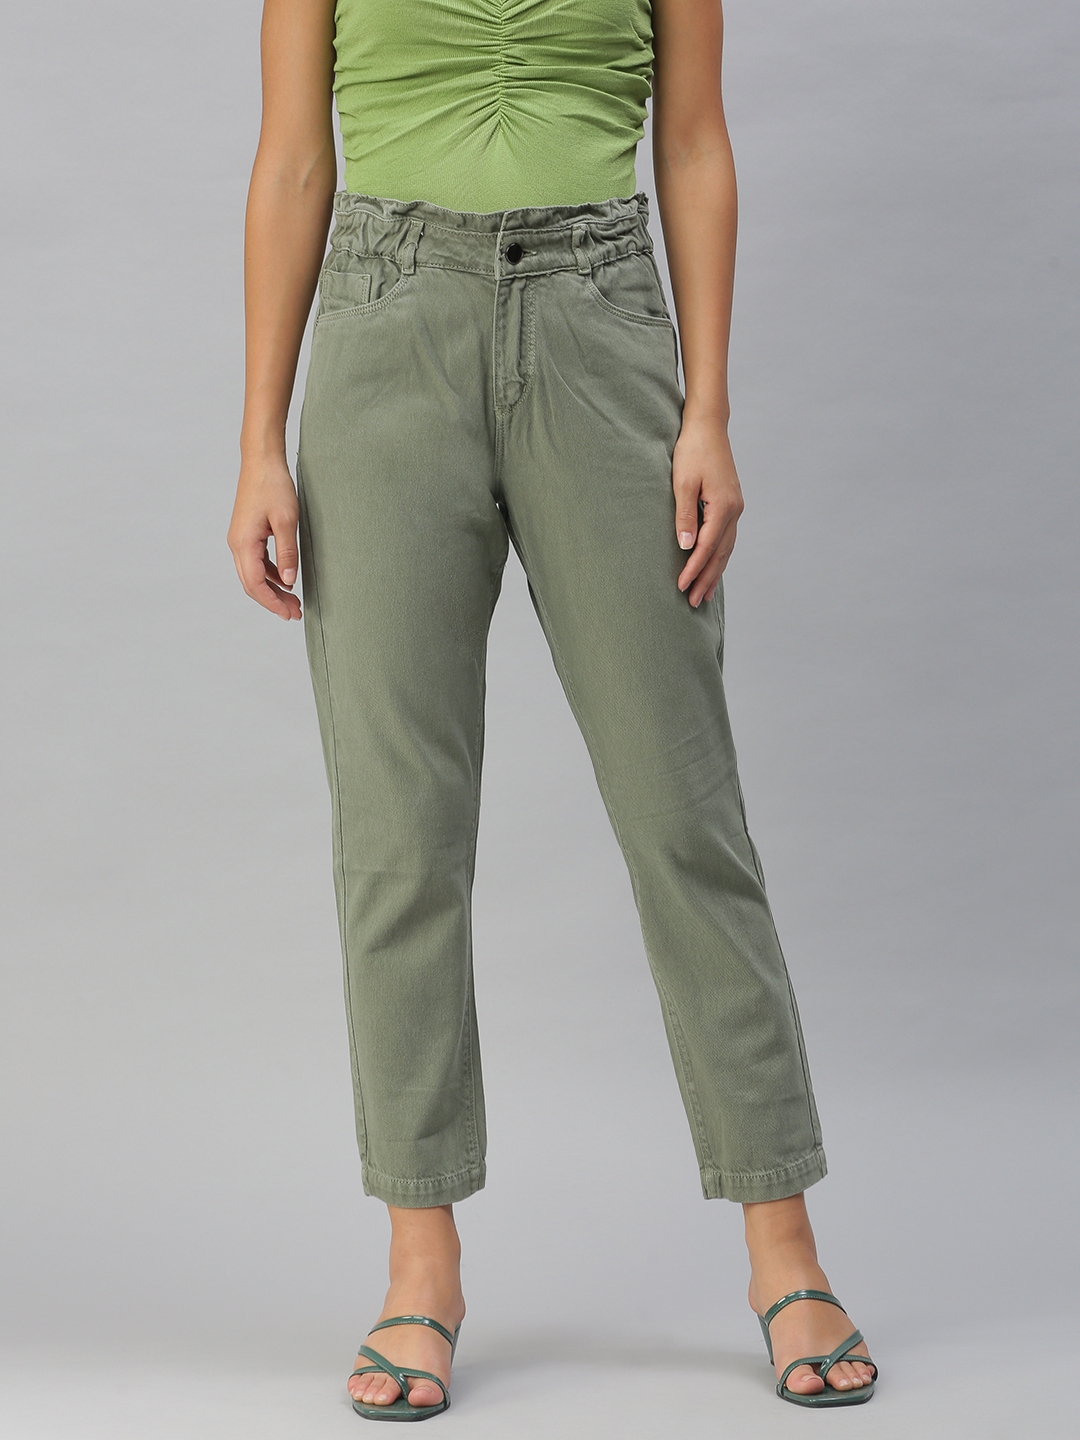 SHOWOFF Women's Clean Look Olive Straight Fit Denim Jeans